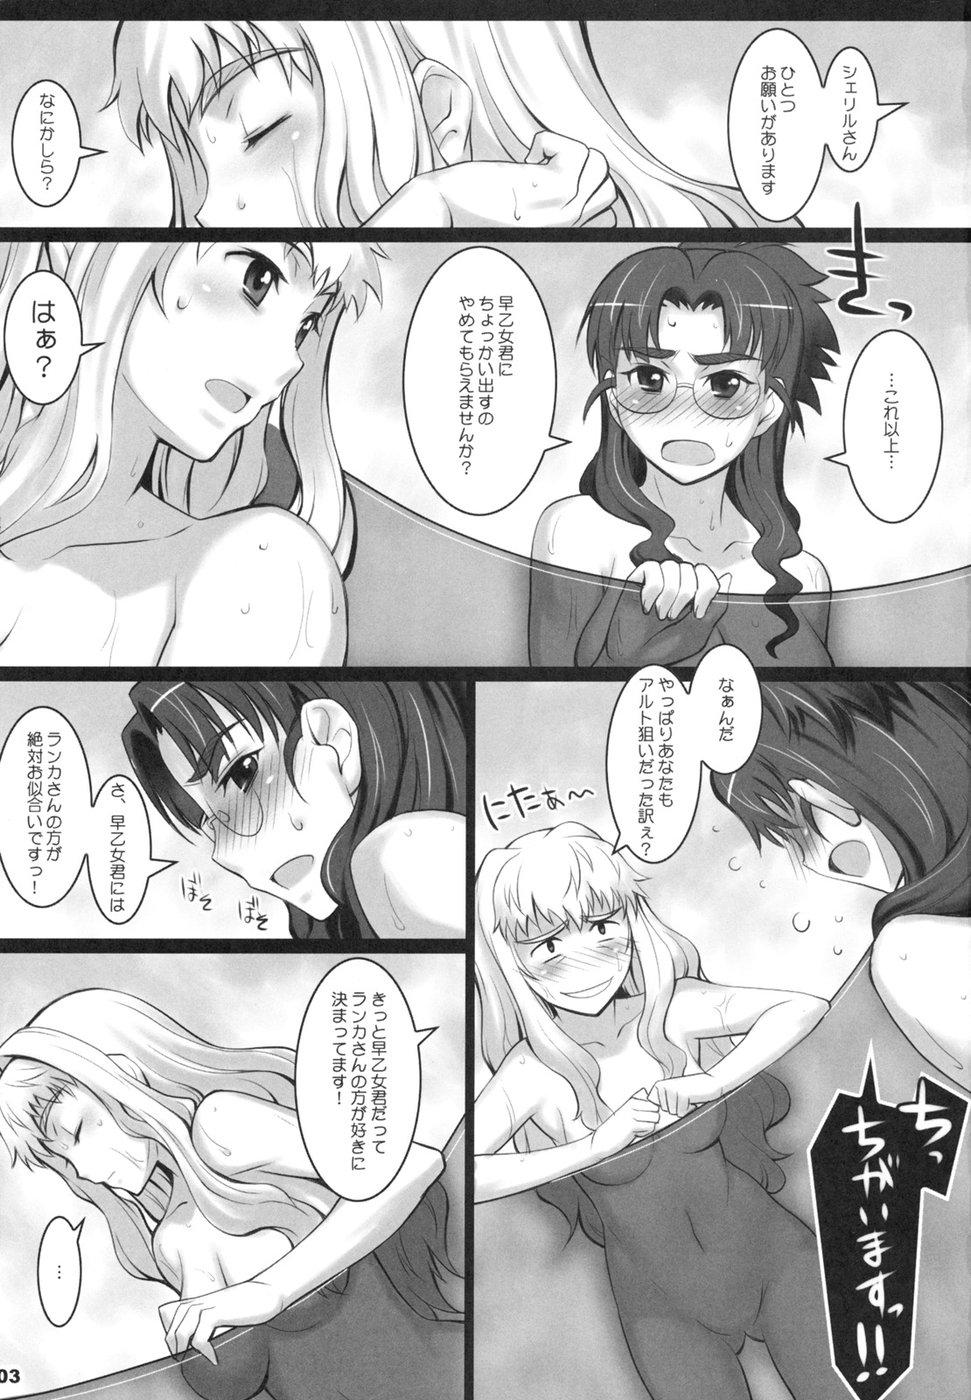 Couch ALFA 7mg - Macross frontier Hotwife - Page 2